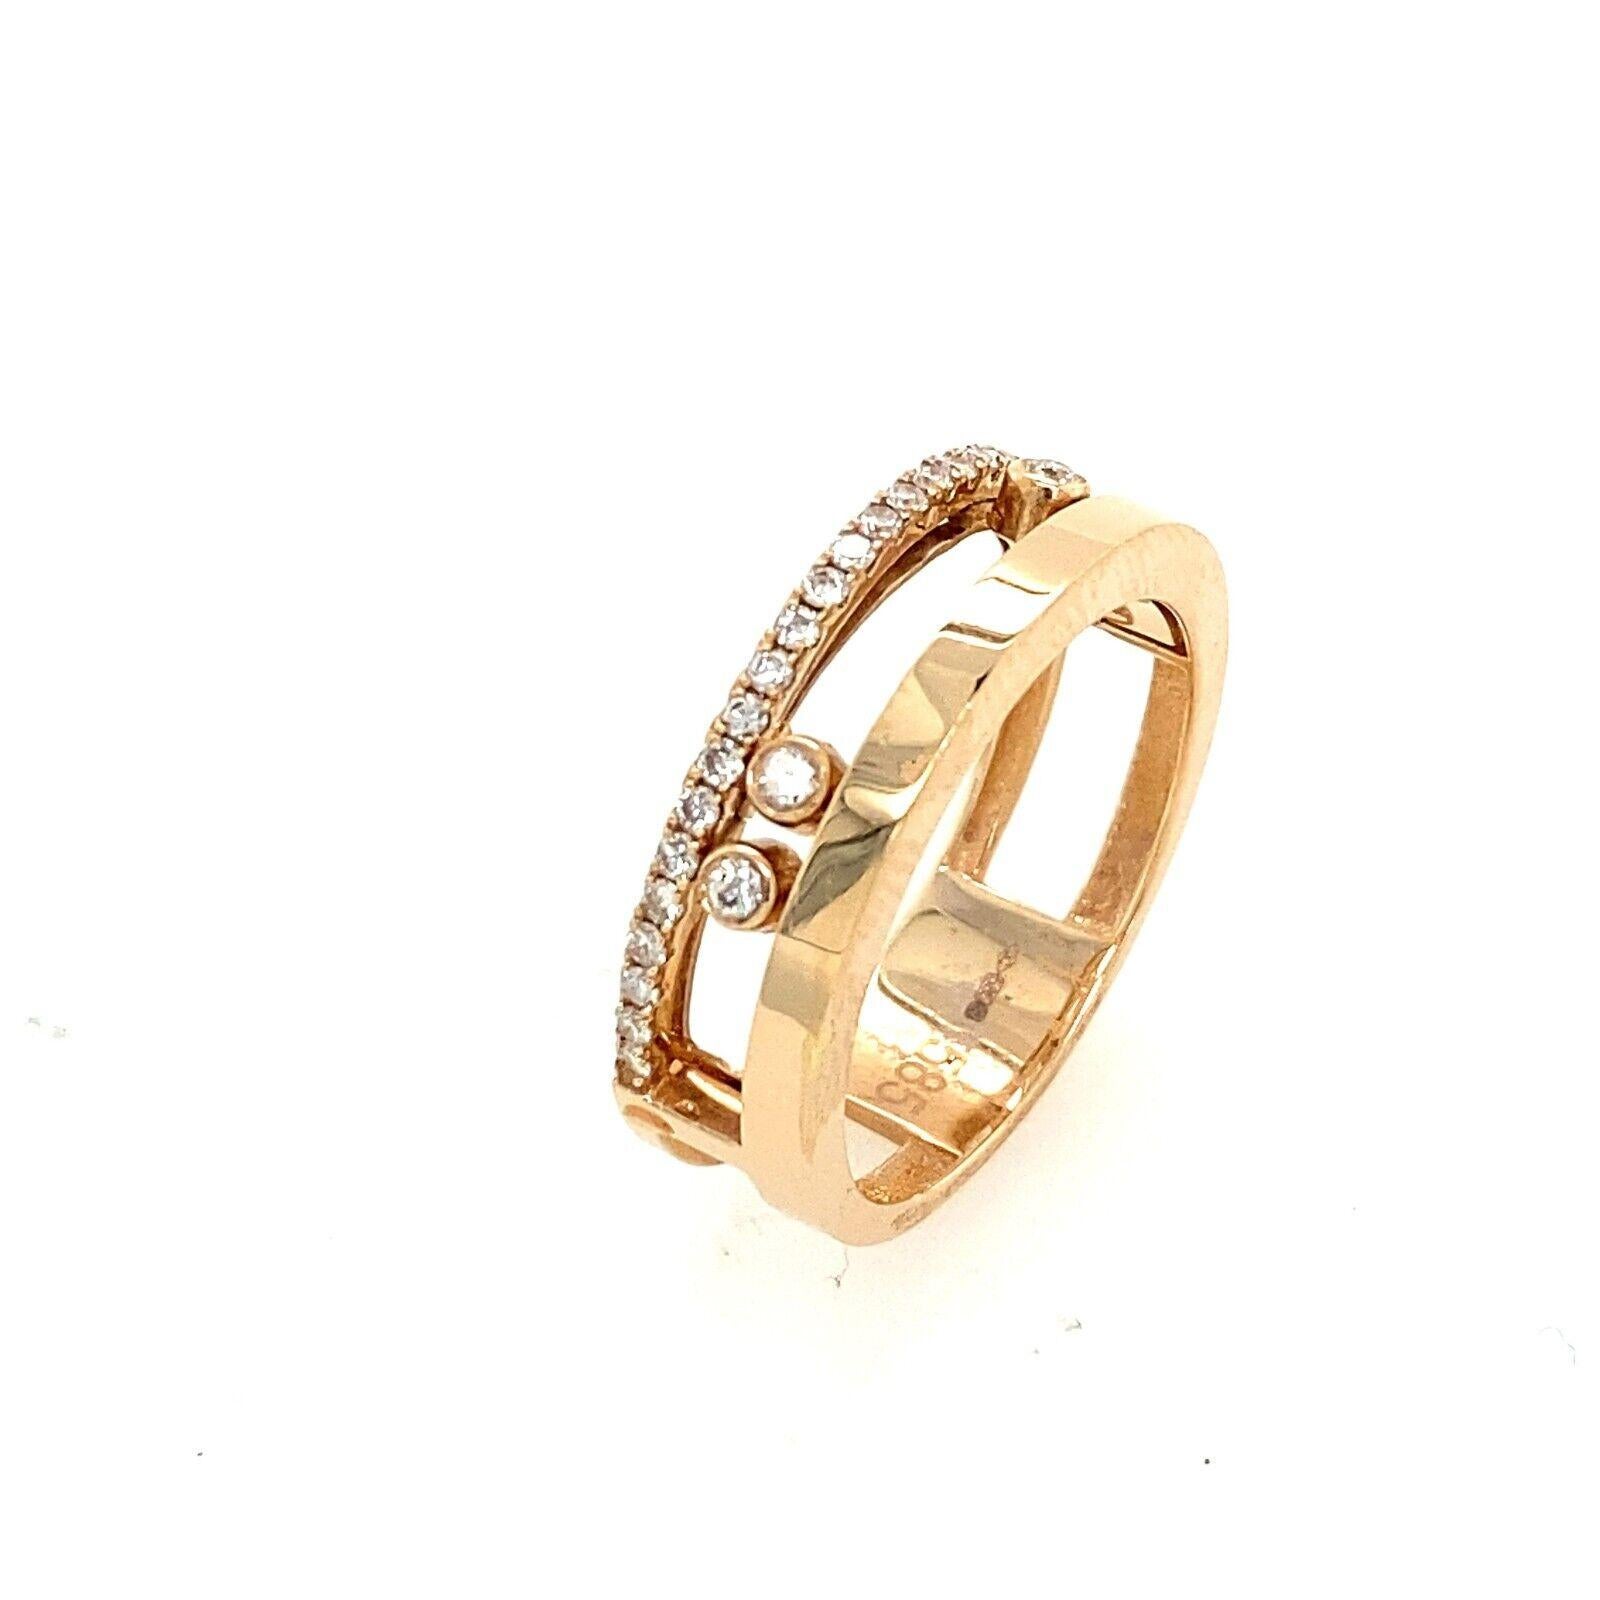 Wide Band with 3 Sliding Diamonds & Row of Pave Set Diamonds in 14ct Rose Gold

This classic 14ct rose gold wide band features three diamonds that slide along the band. Set with a row of pave set diamonds, this ring is perfect for stacking with